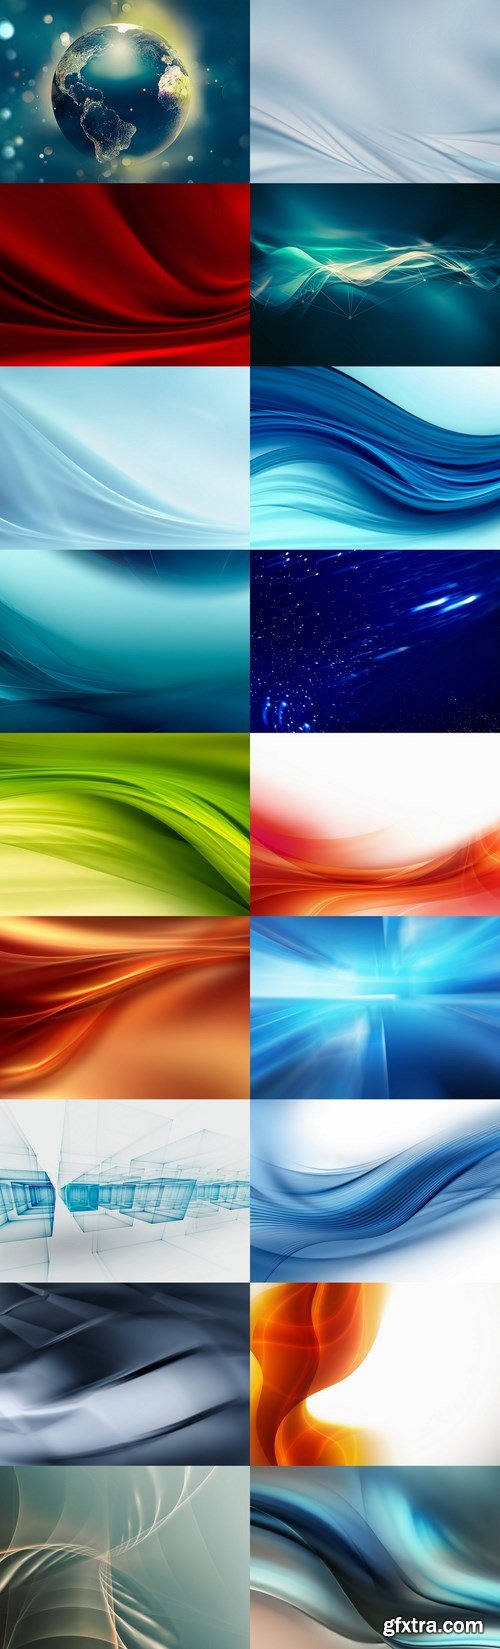 Abstract Backgrounds Pack